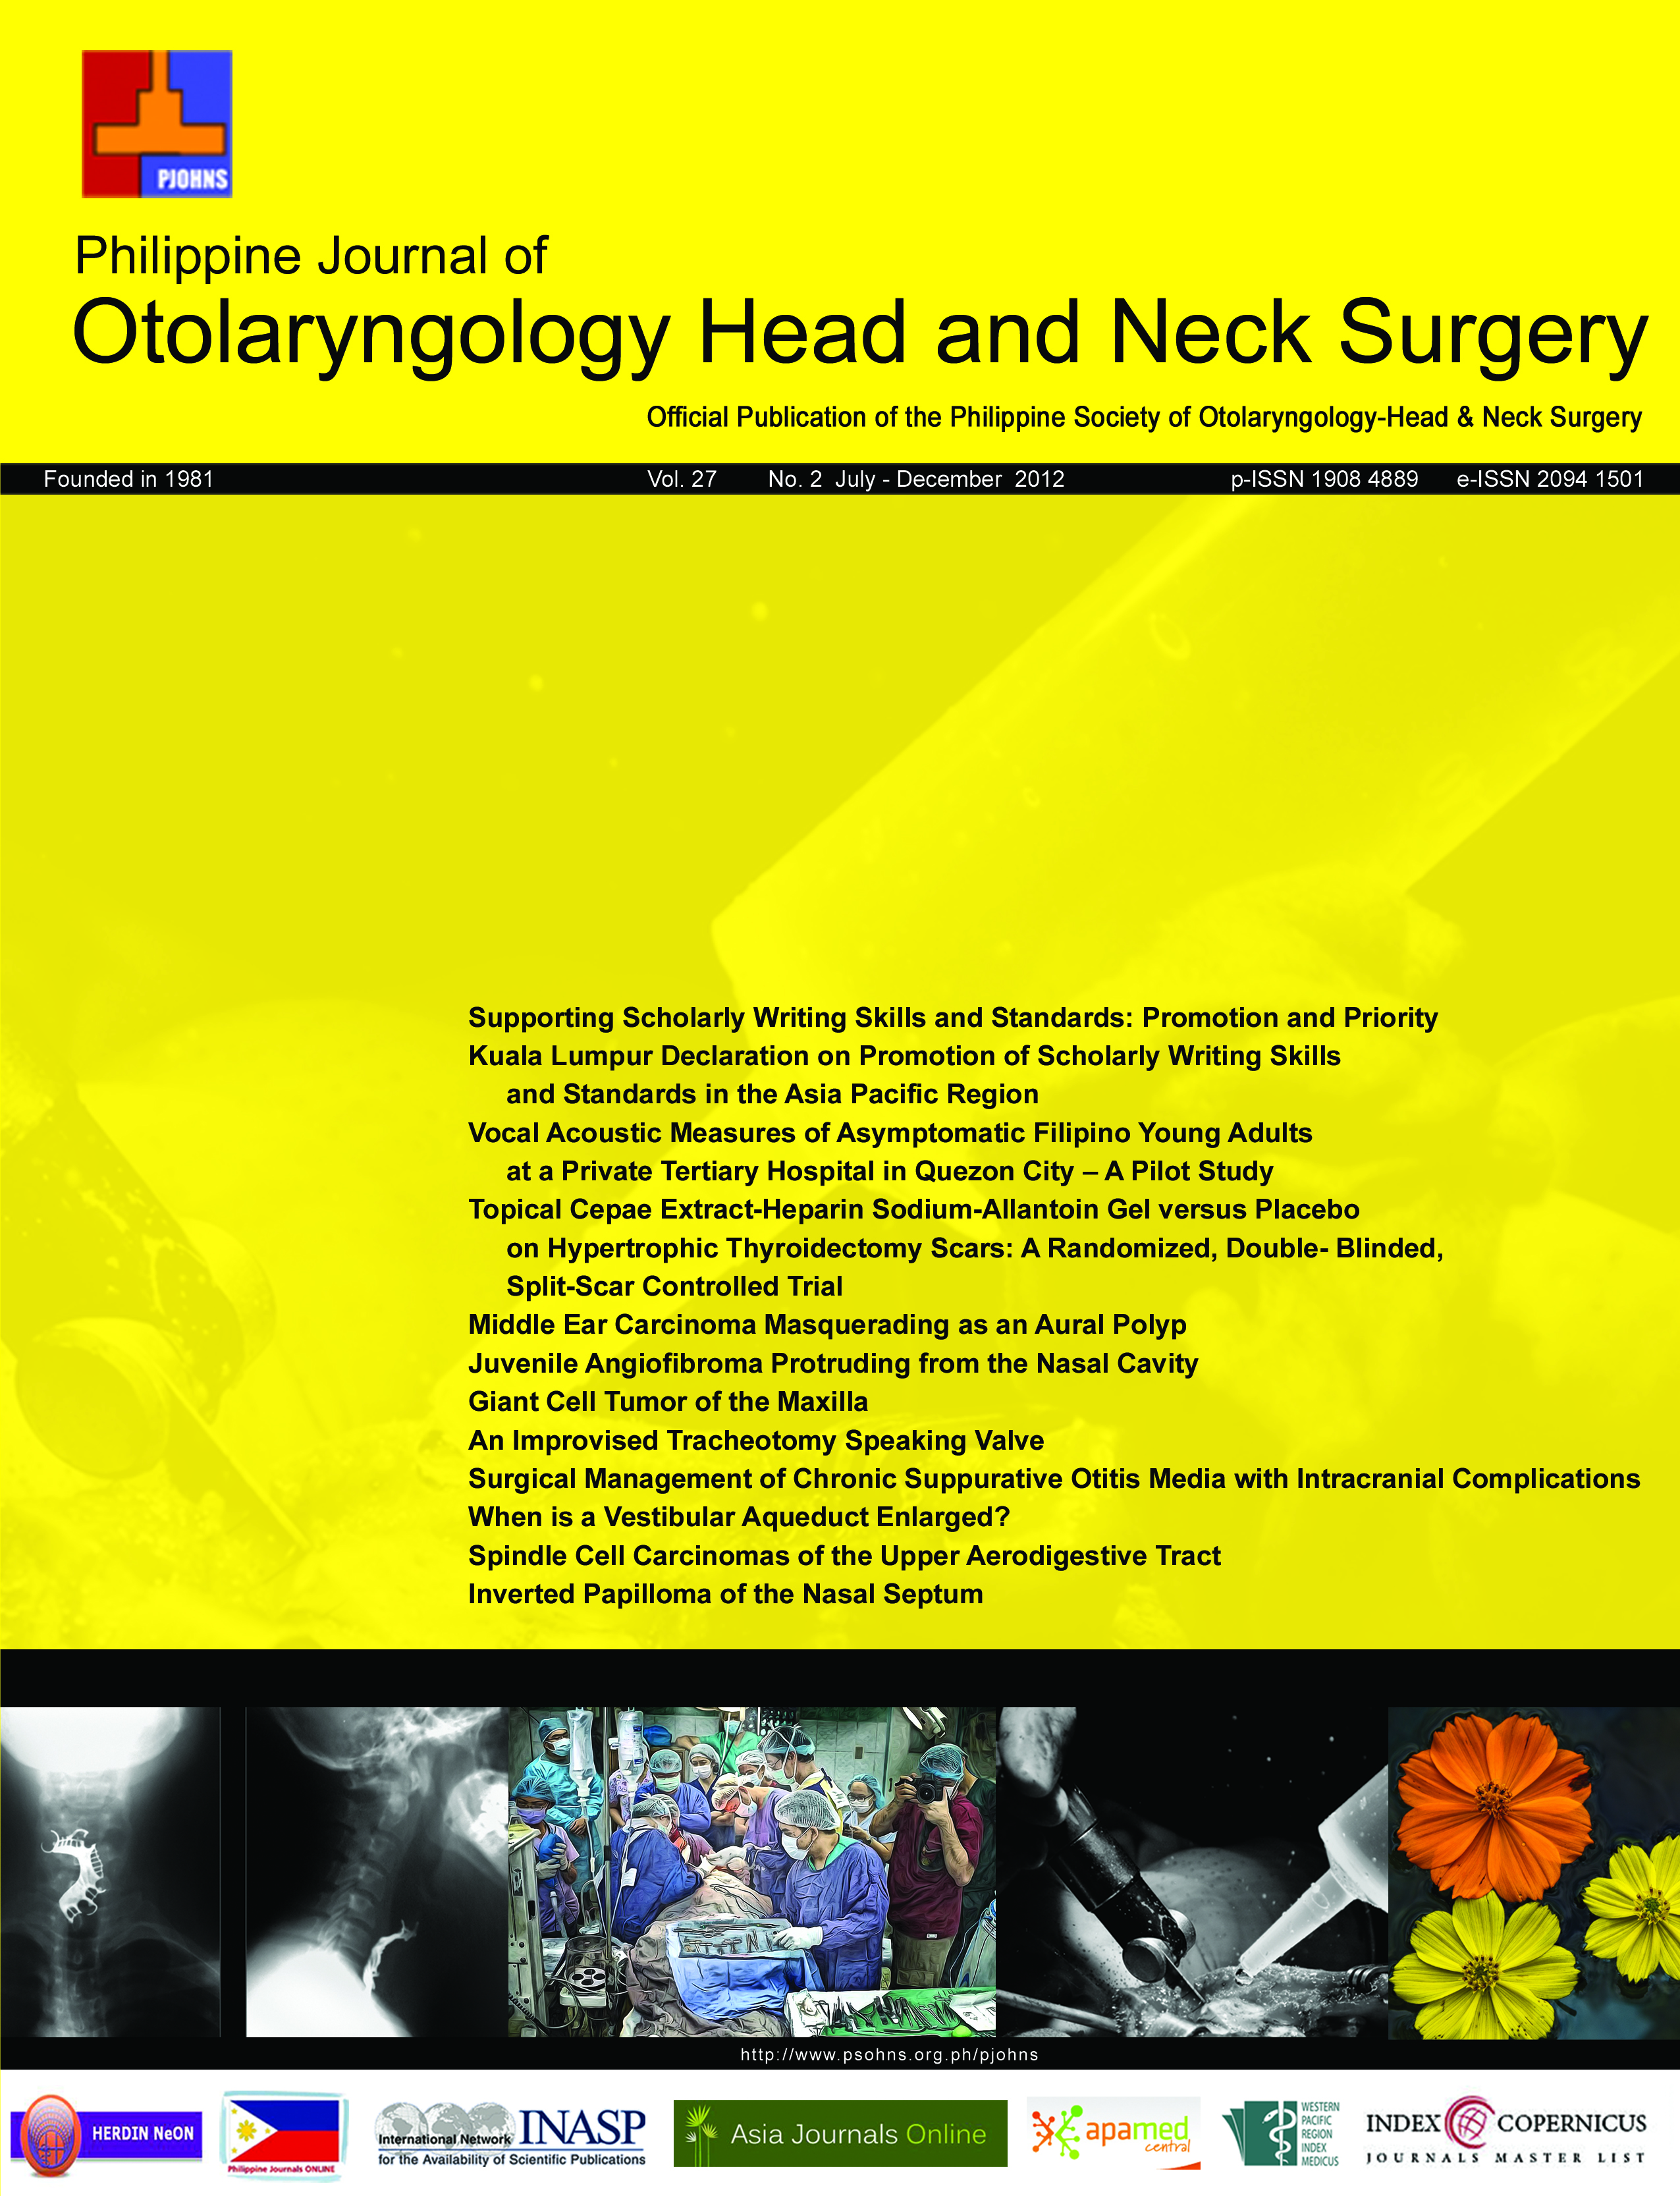 					View Vol. 27 No. 2 (2012): Philippine Journal of Otolaryngology-Head and Neck Surgery
				